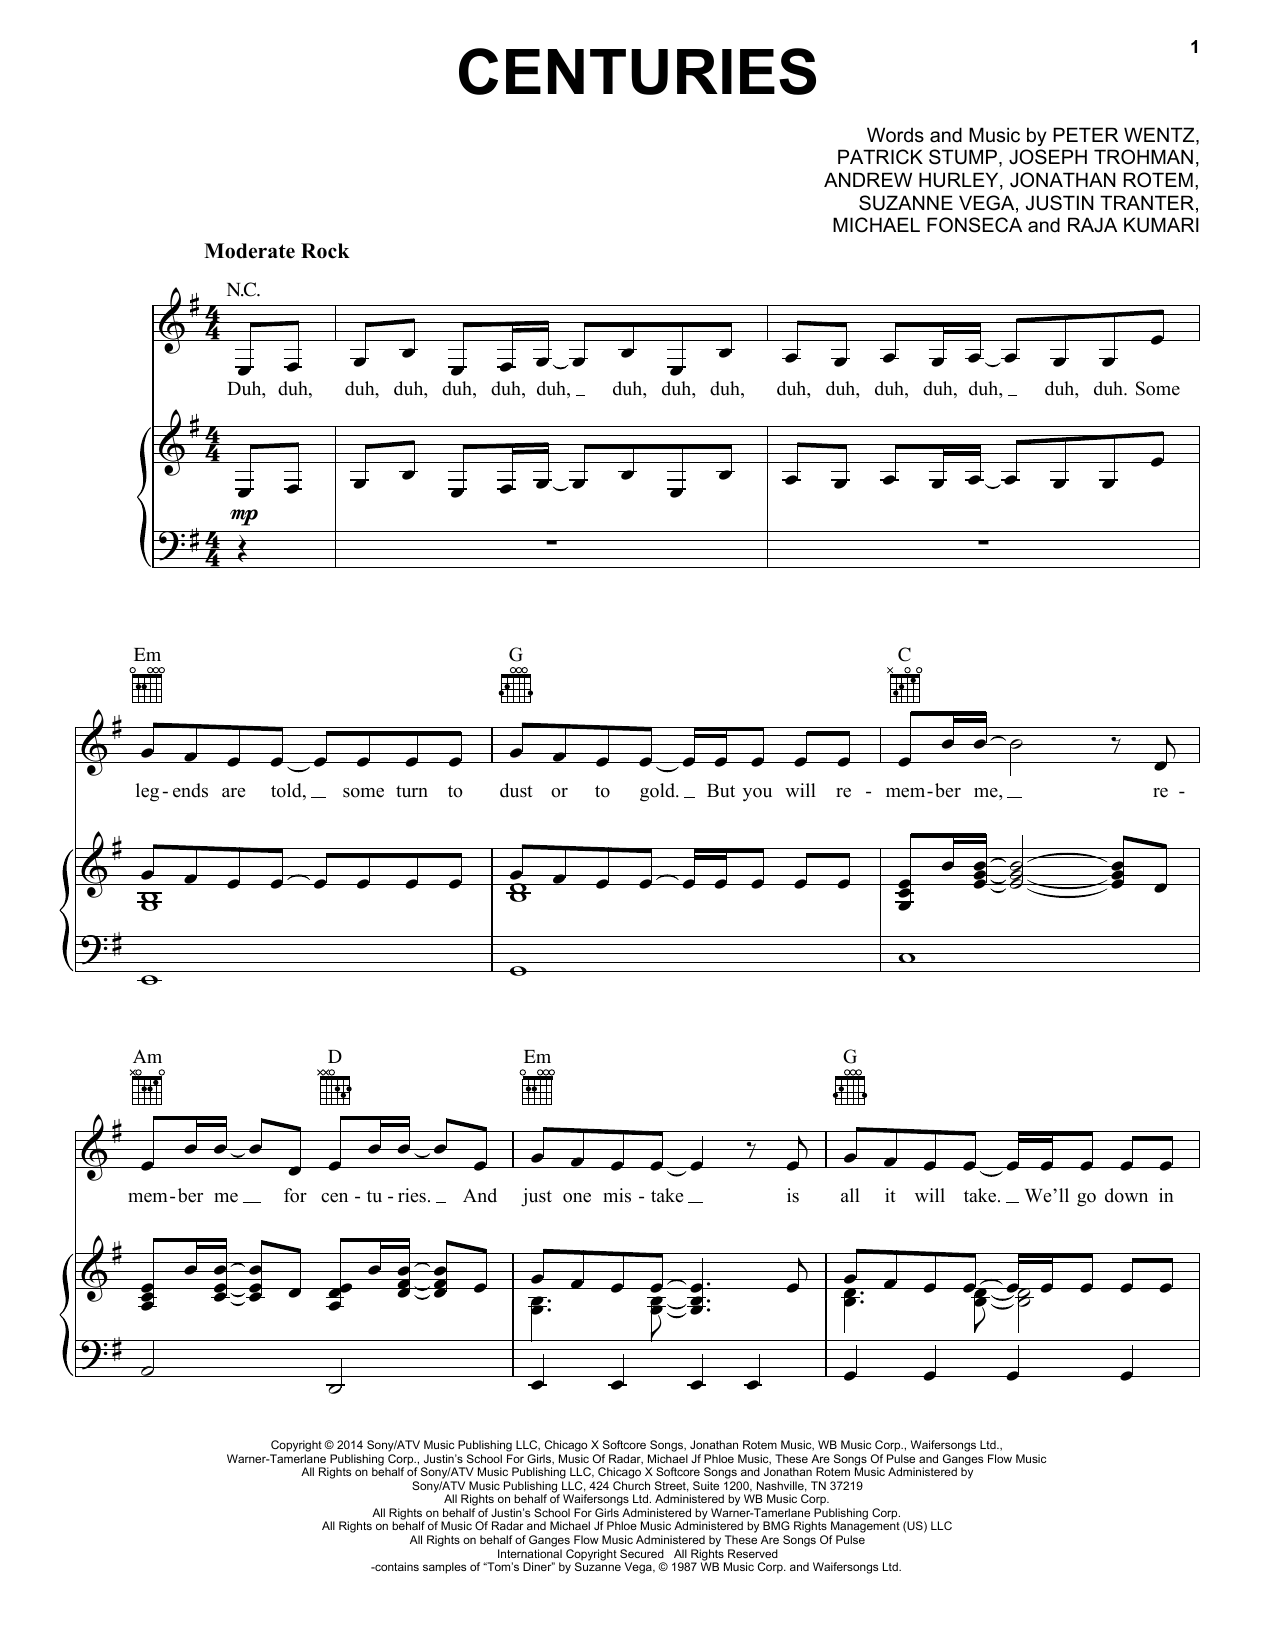 Fall Out Boy Centuries sheet music notes and chords. Download Printable PDF.